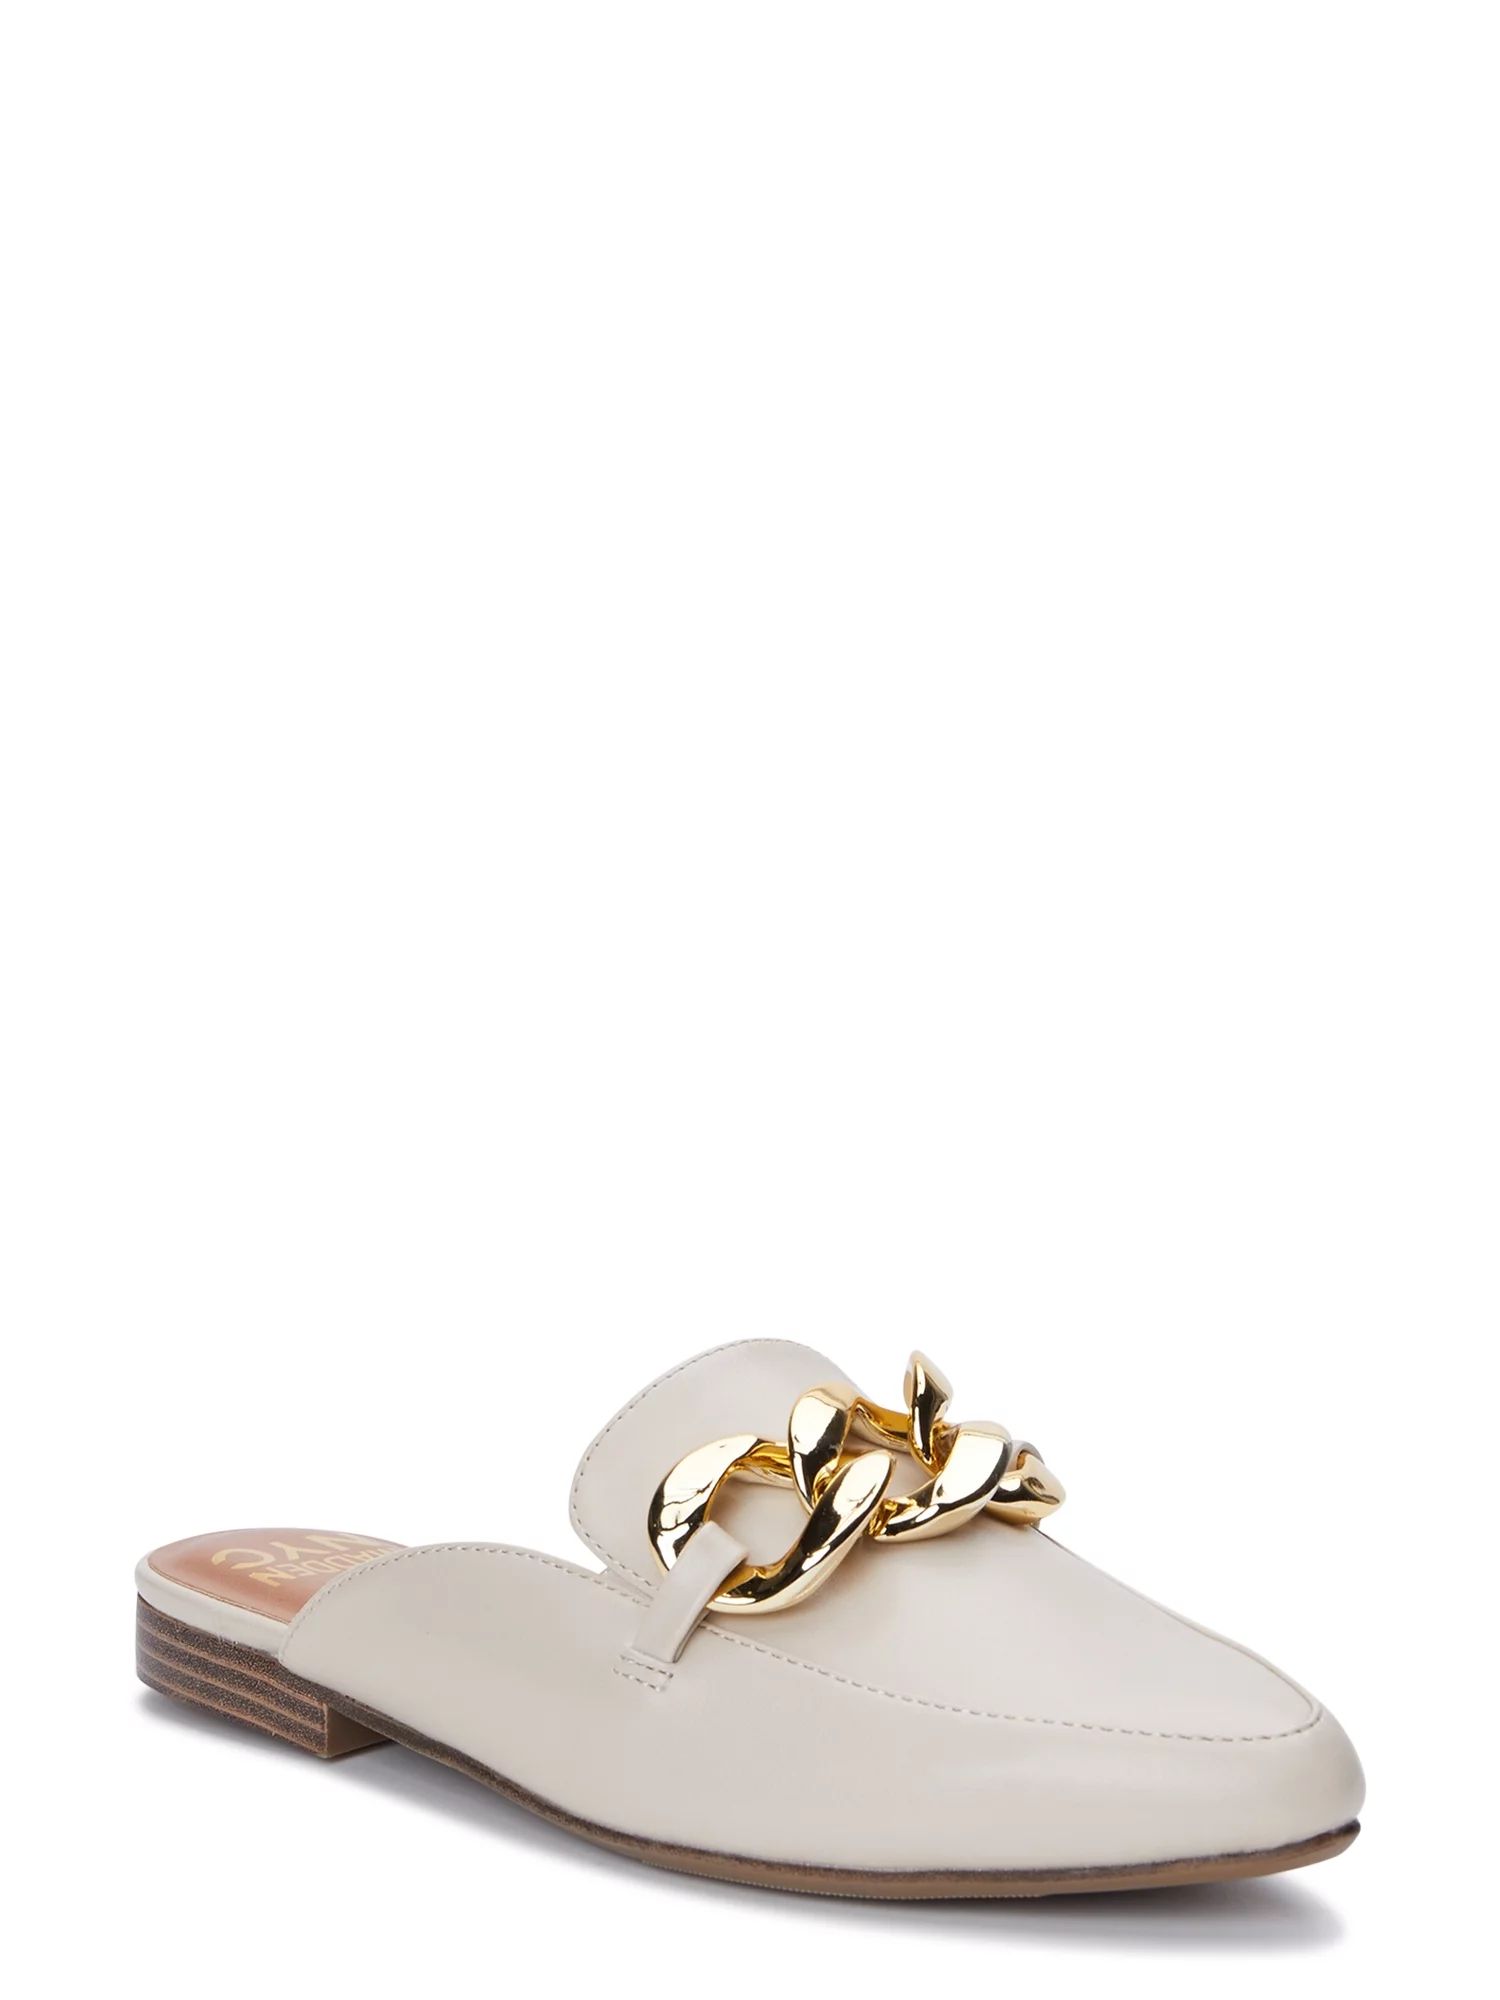 Madden NYC Women's Almond Toe Mules with Gold-Tone Chain | Walmart (US)